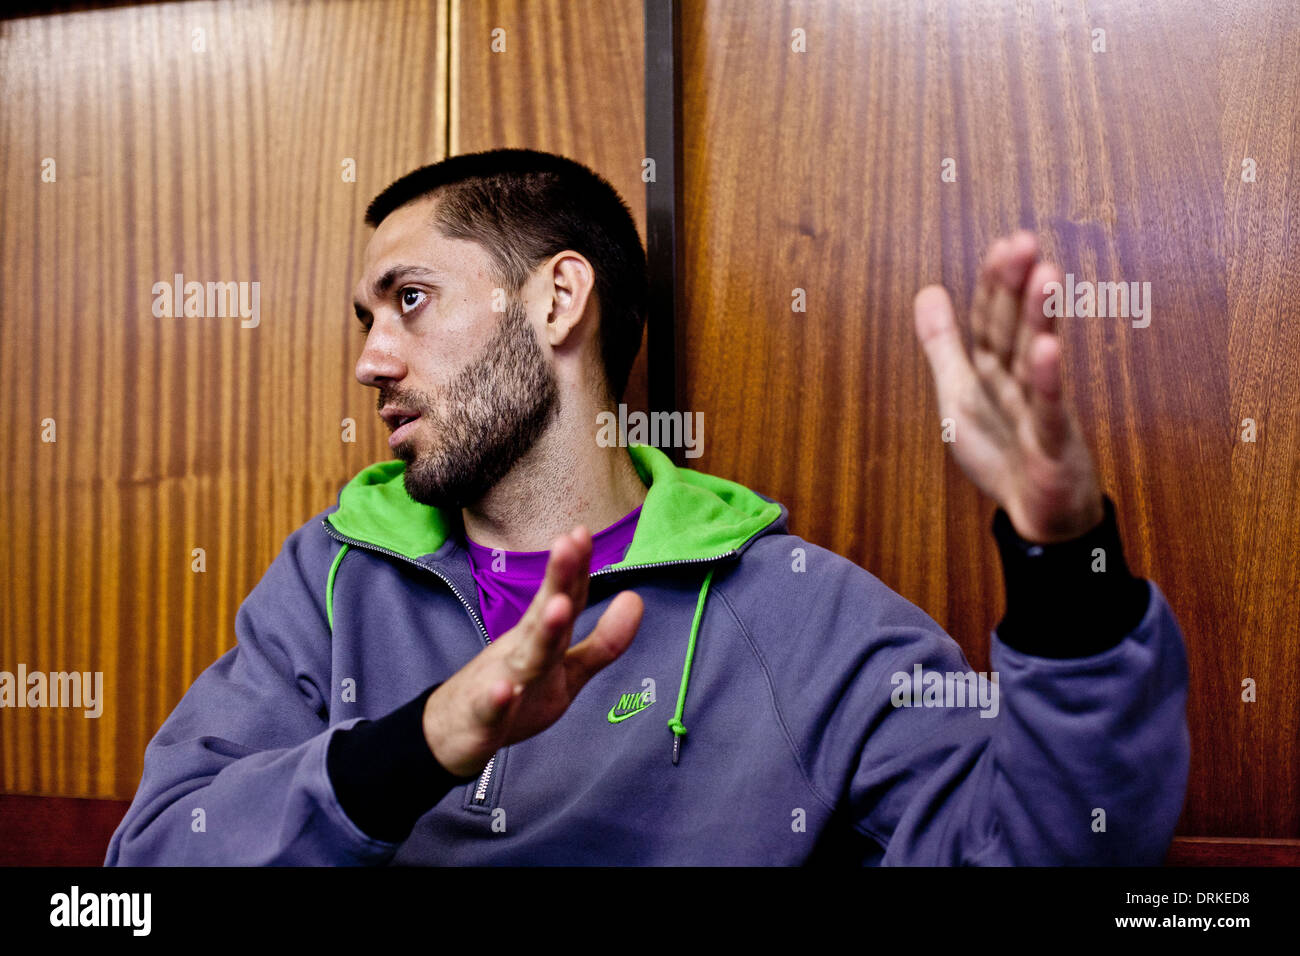 North American Soccer Star Clint Dempsey in London Stock Photo